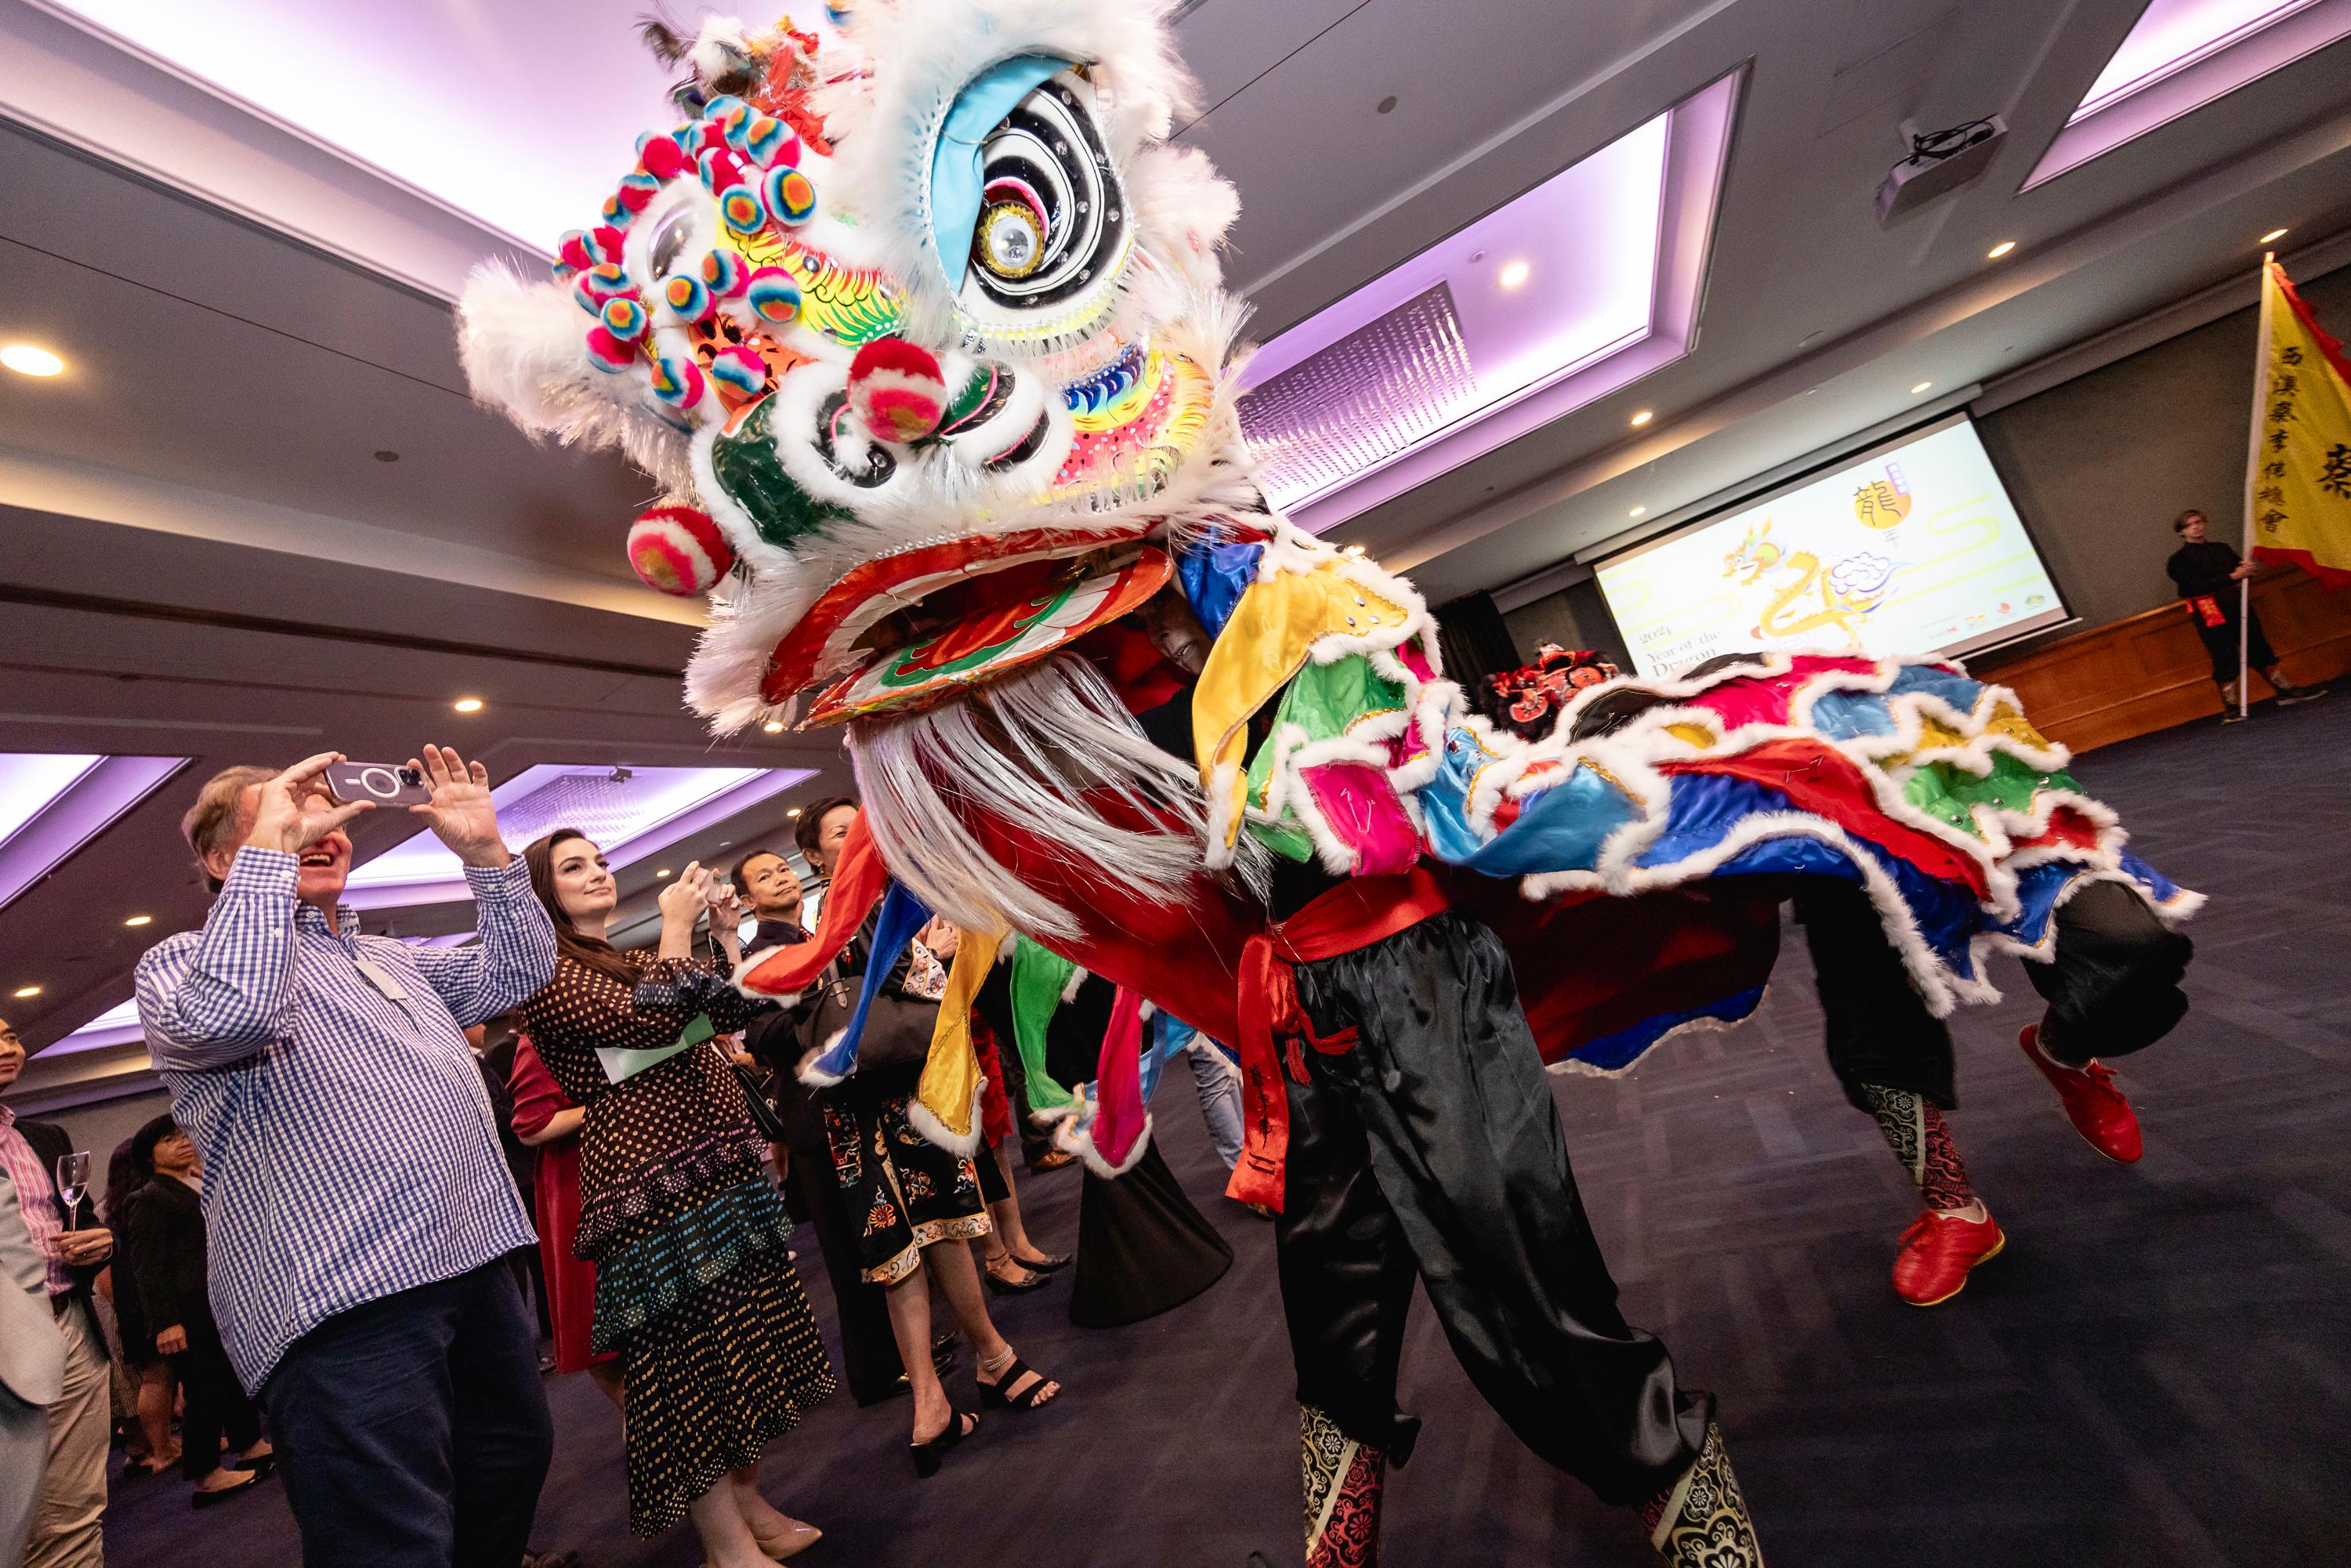 The Hong Kong Economic and Trade Office, Sydney hosted a reception in Perth, Australia, today (March 7) to celebrate Chinese New Year. Photo shows a lion dance performance at the reception.